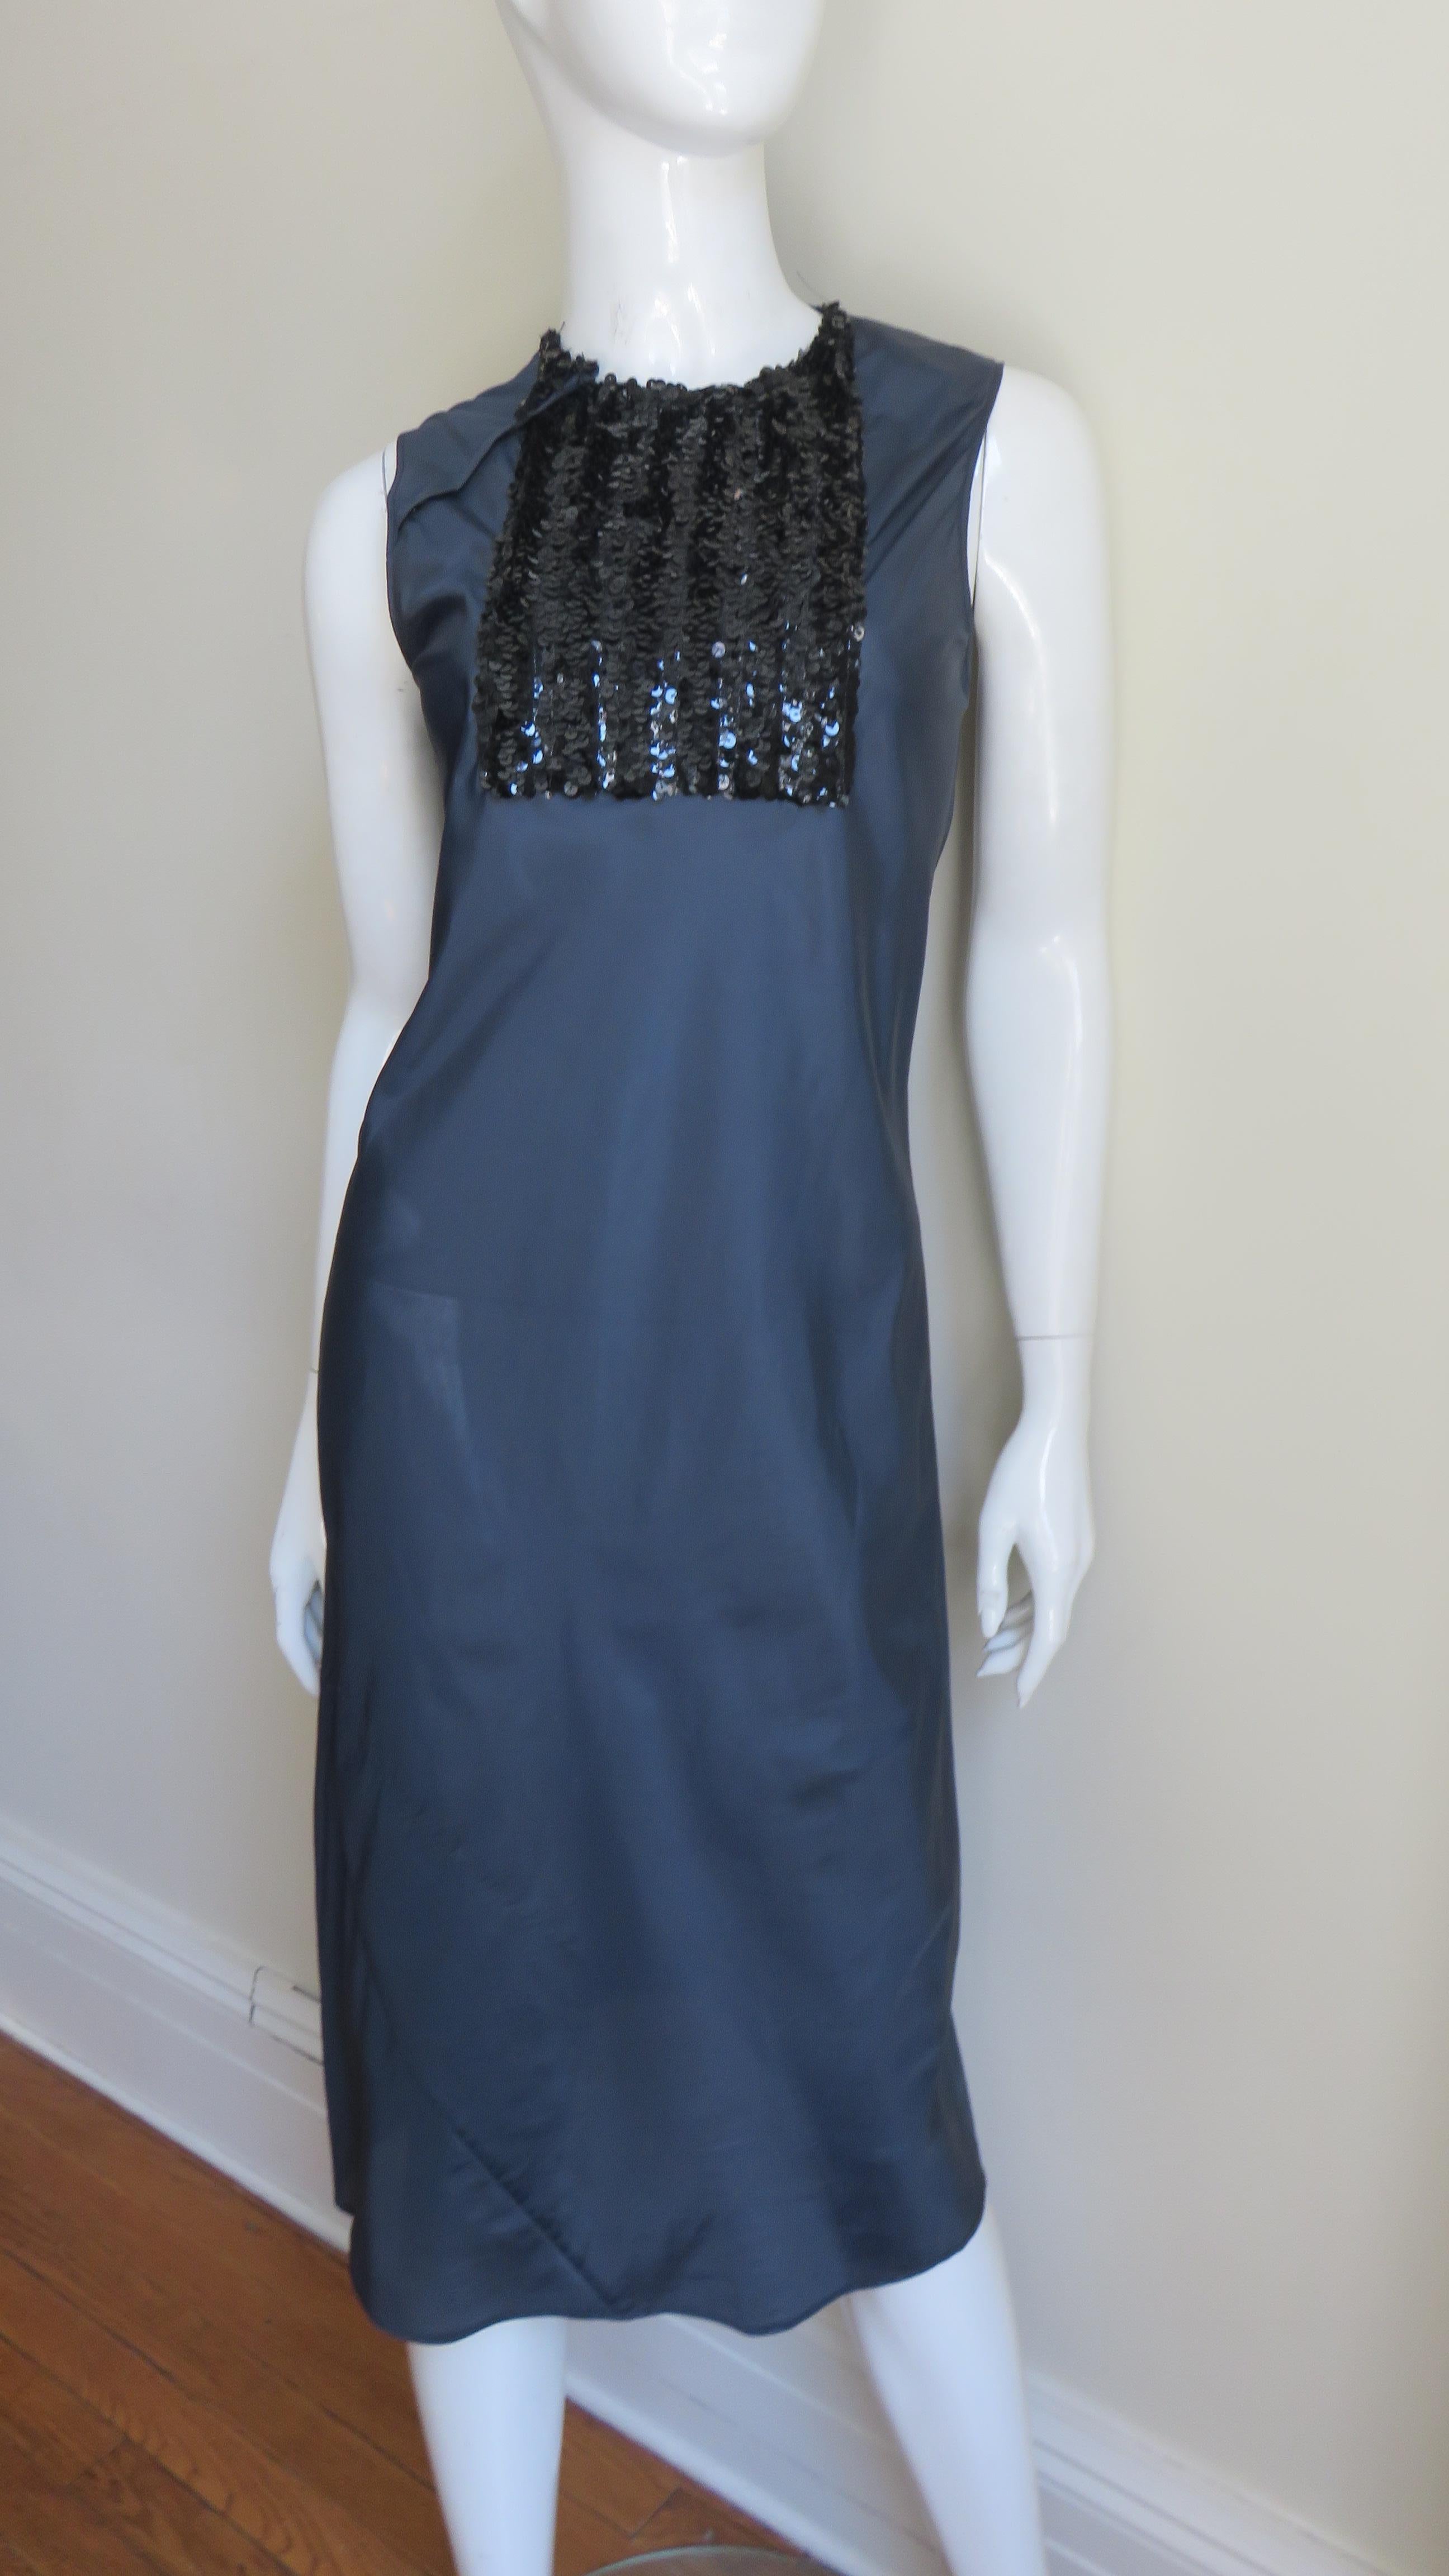 Helmut Lang New Dress with Sequins 1990s In Excellent Condition For Sale In Water Mill, NY